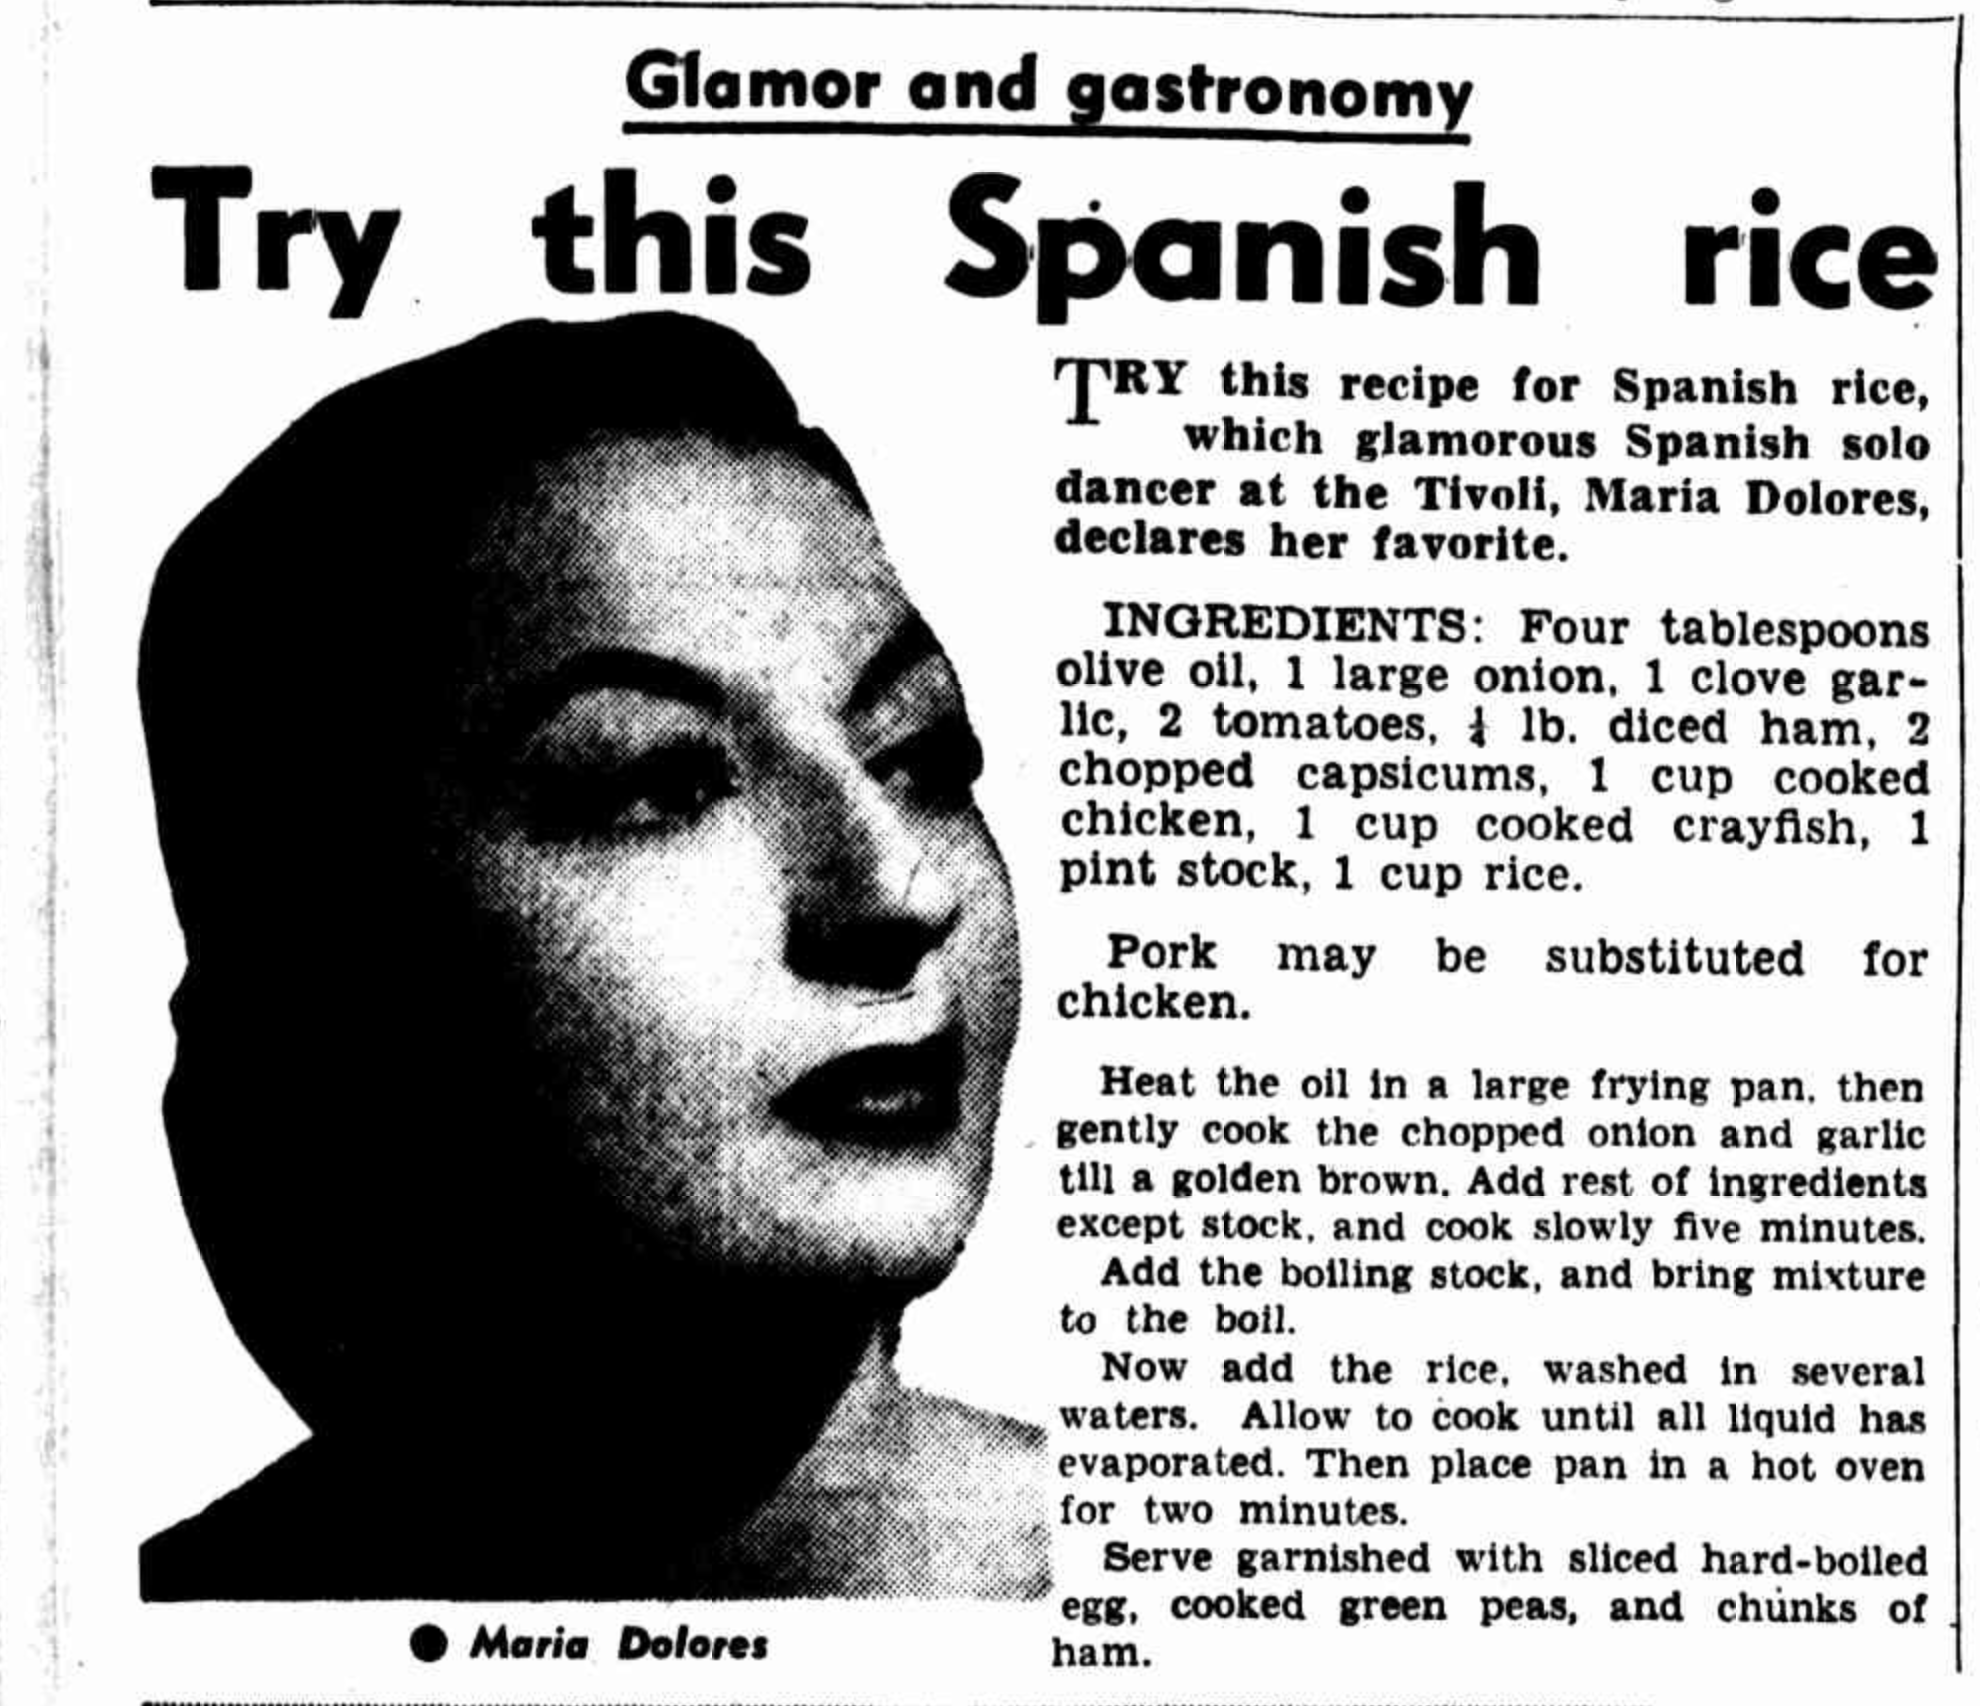 A newspaper article under Glamor and gastronomy for Spanish rice. 